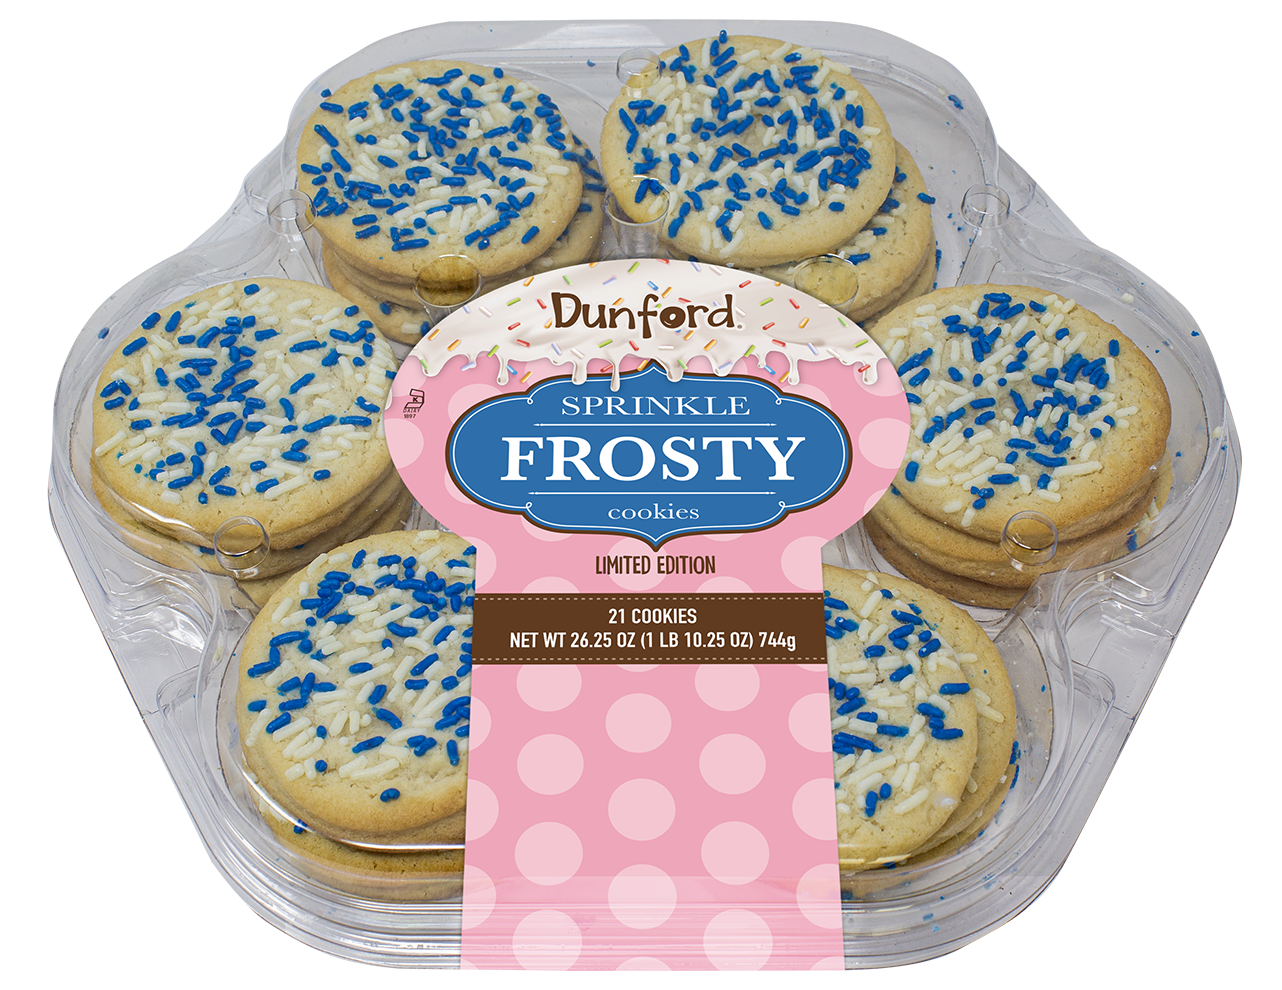 Dunford Frosty Cookies